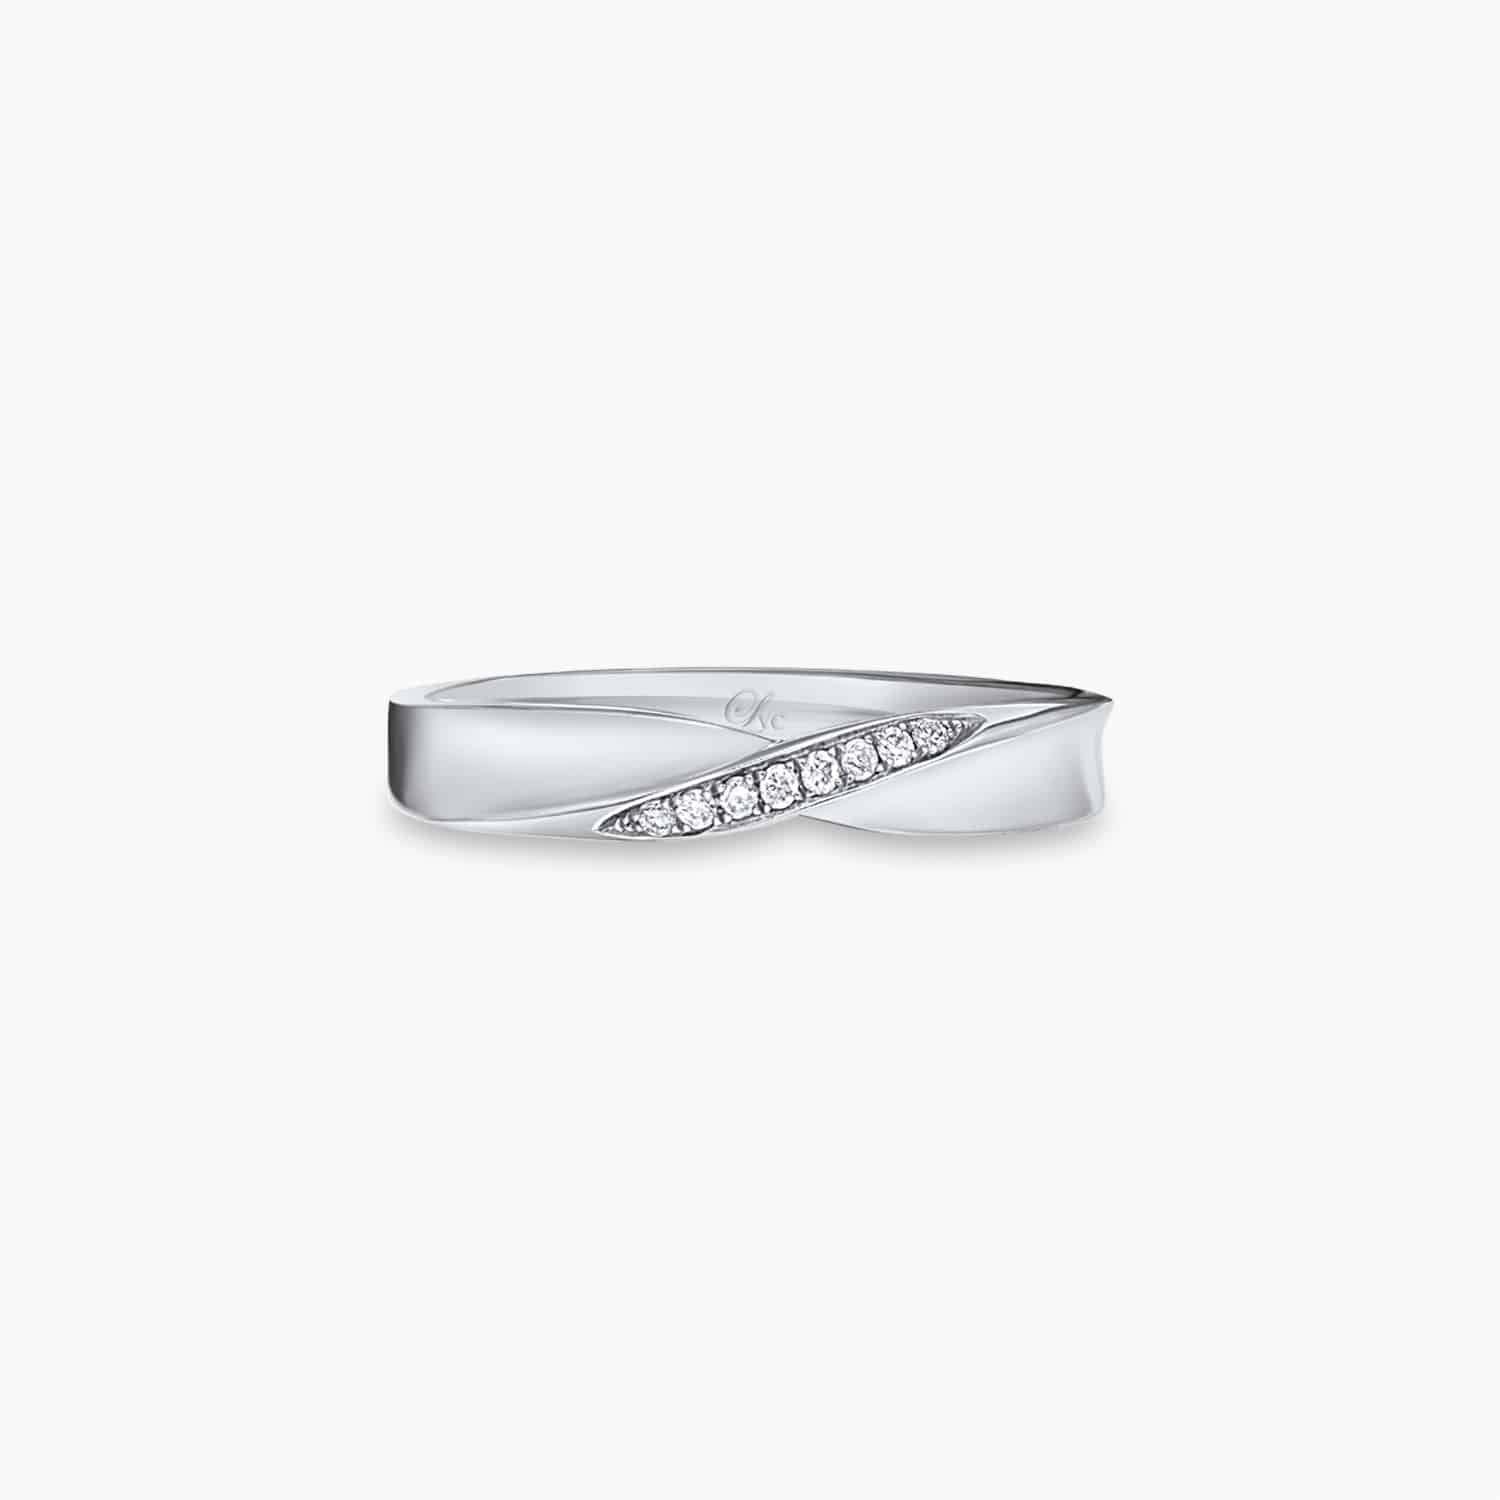 LVC Desirio Infinity Wedding Ring for women in White Gold with a Band of Diamonds